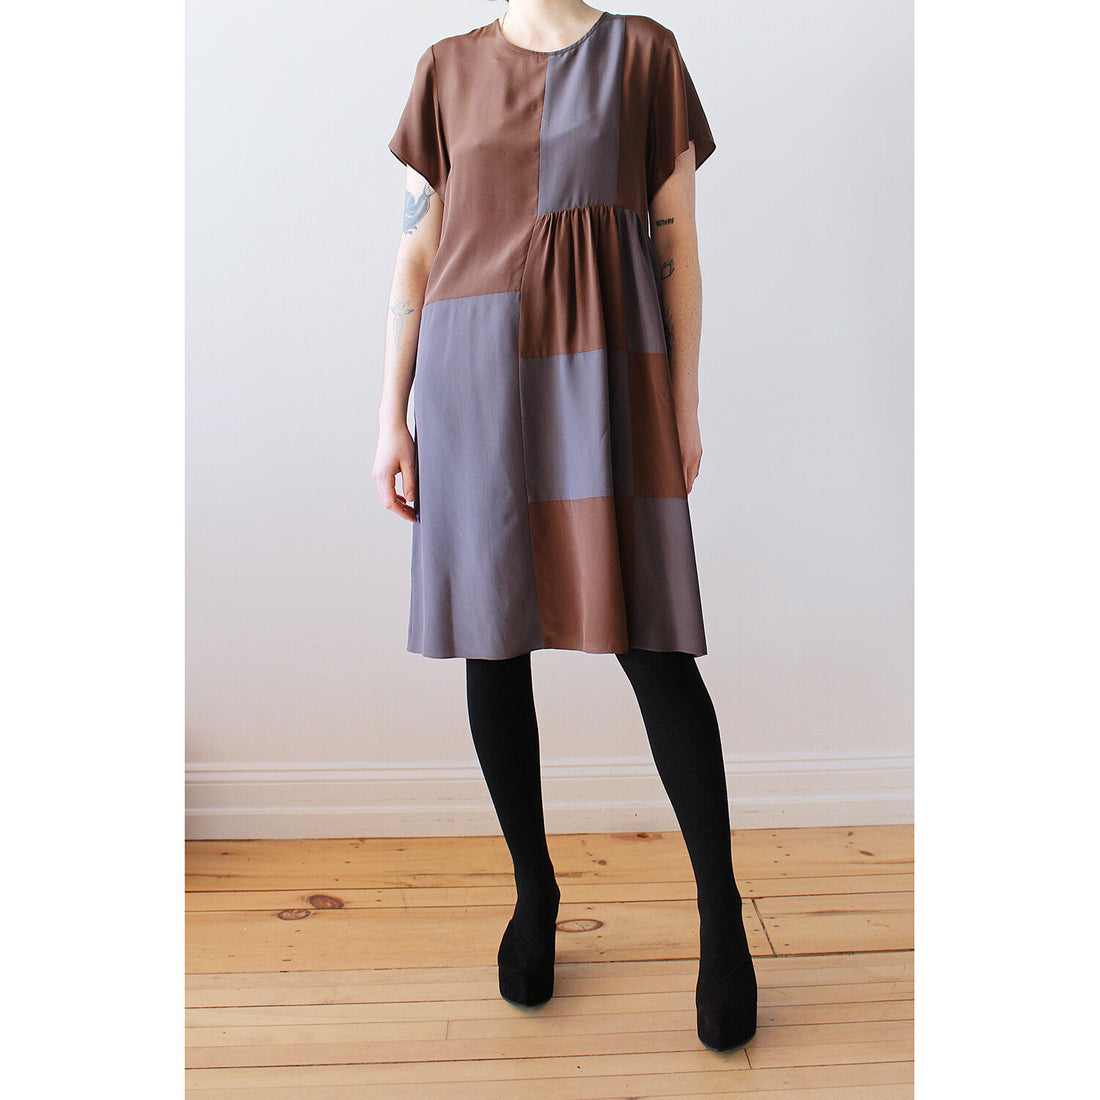 Correll Correll Checky Dress in Brown/Grey